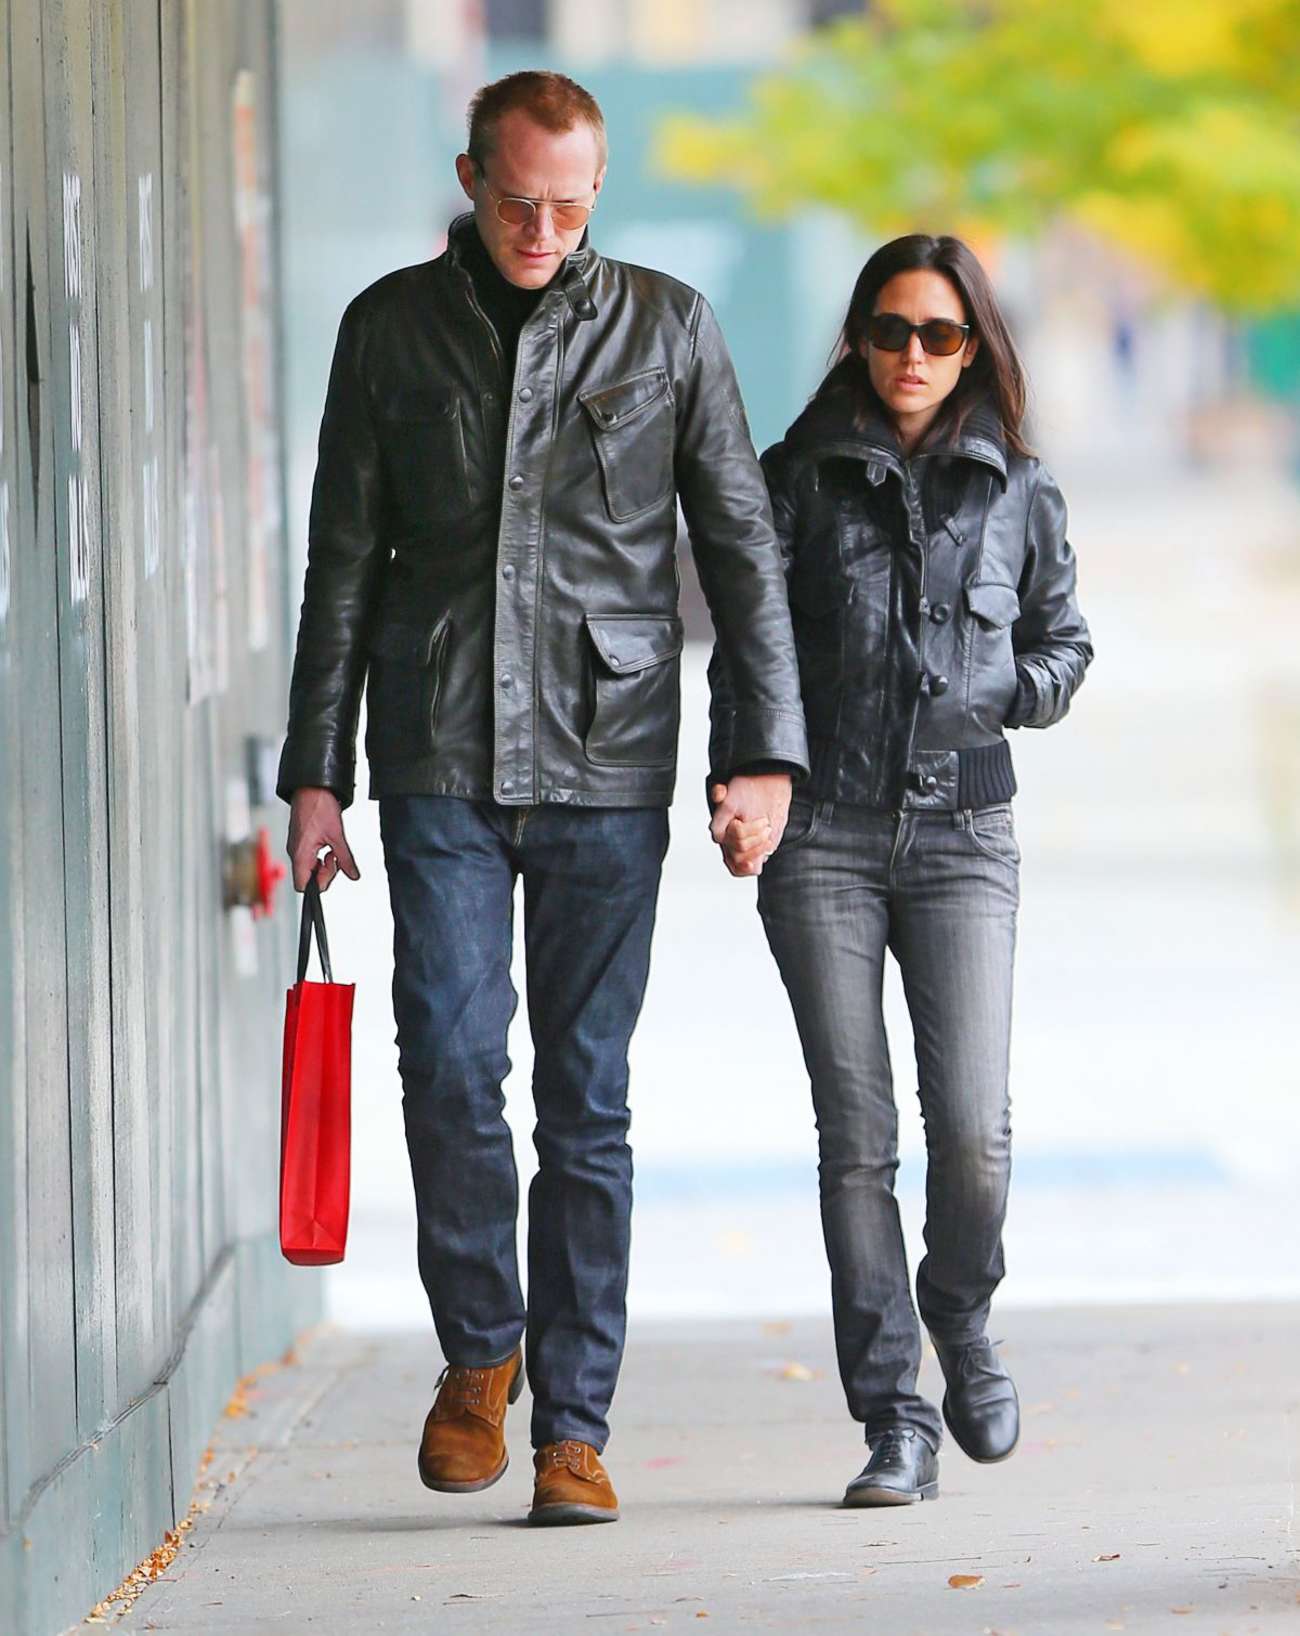 Jennifer Connelly in Jeans and Leather Jacket -05 - GotCeleb